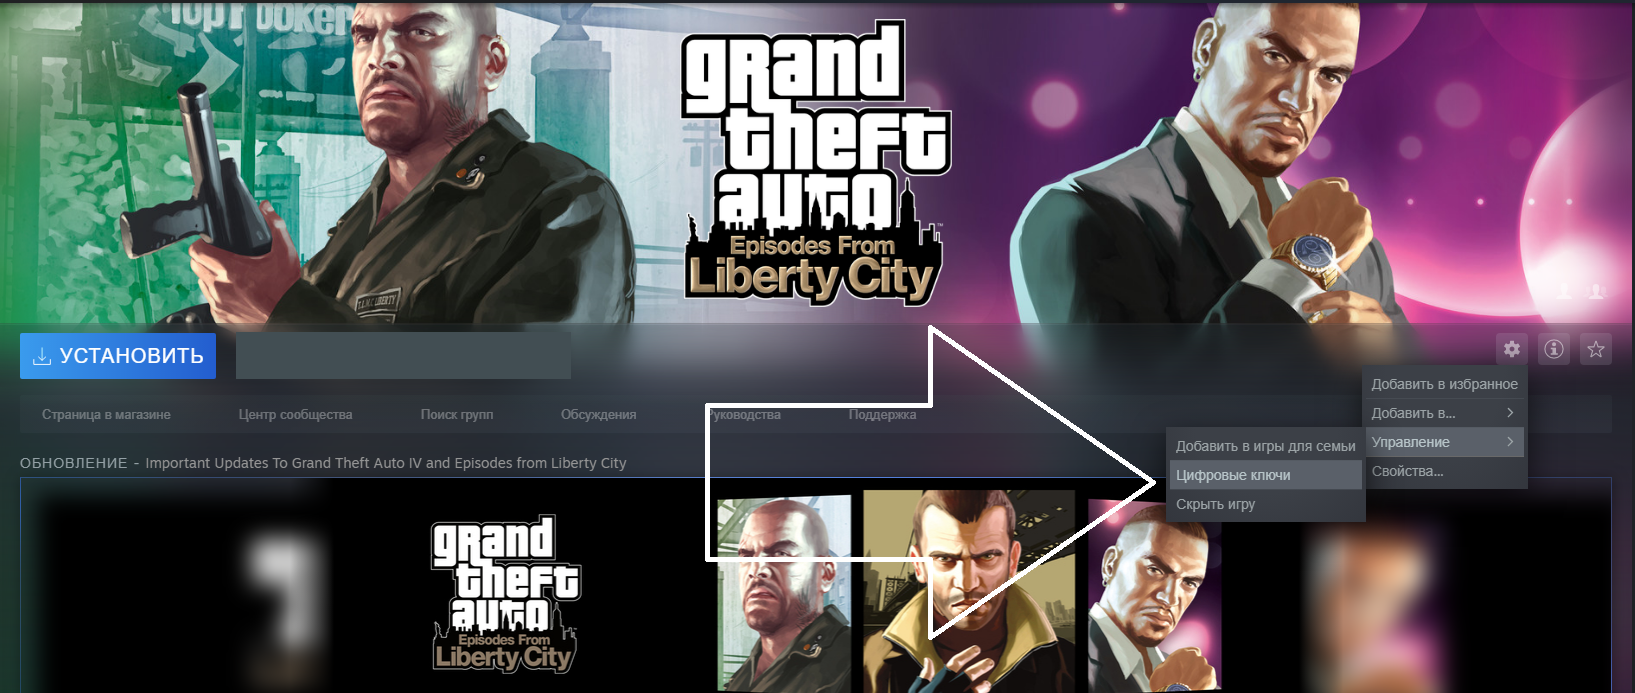 gta episodes from liberty city steam